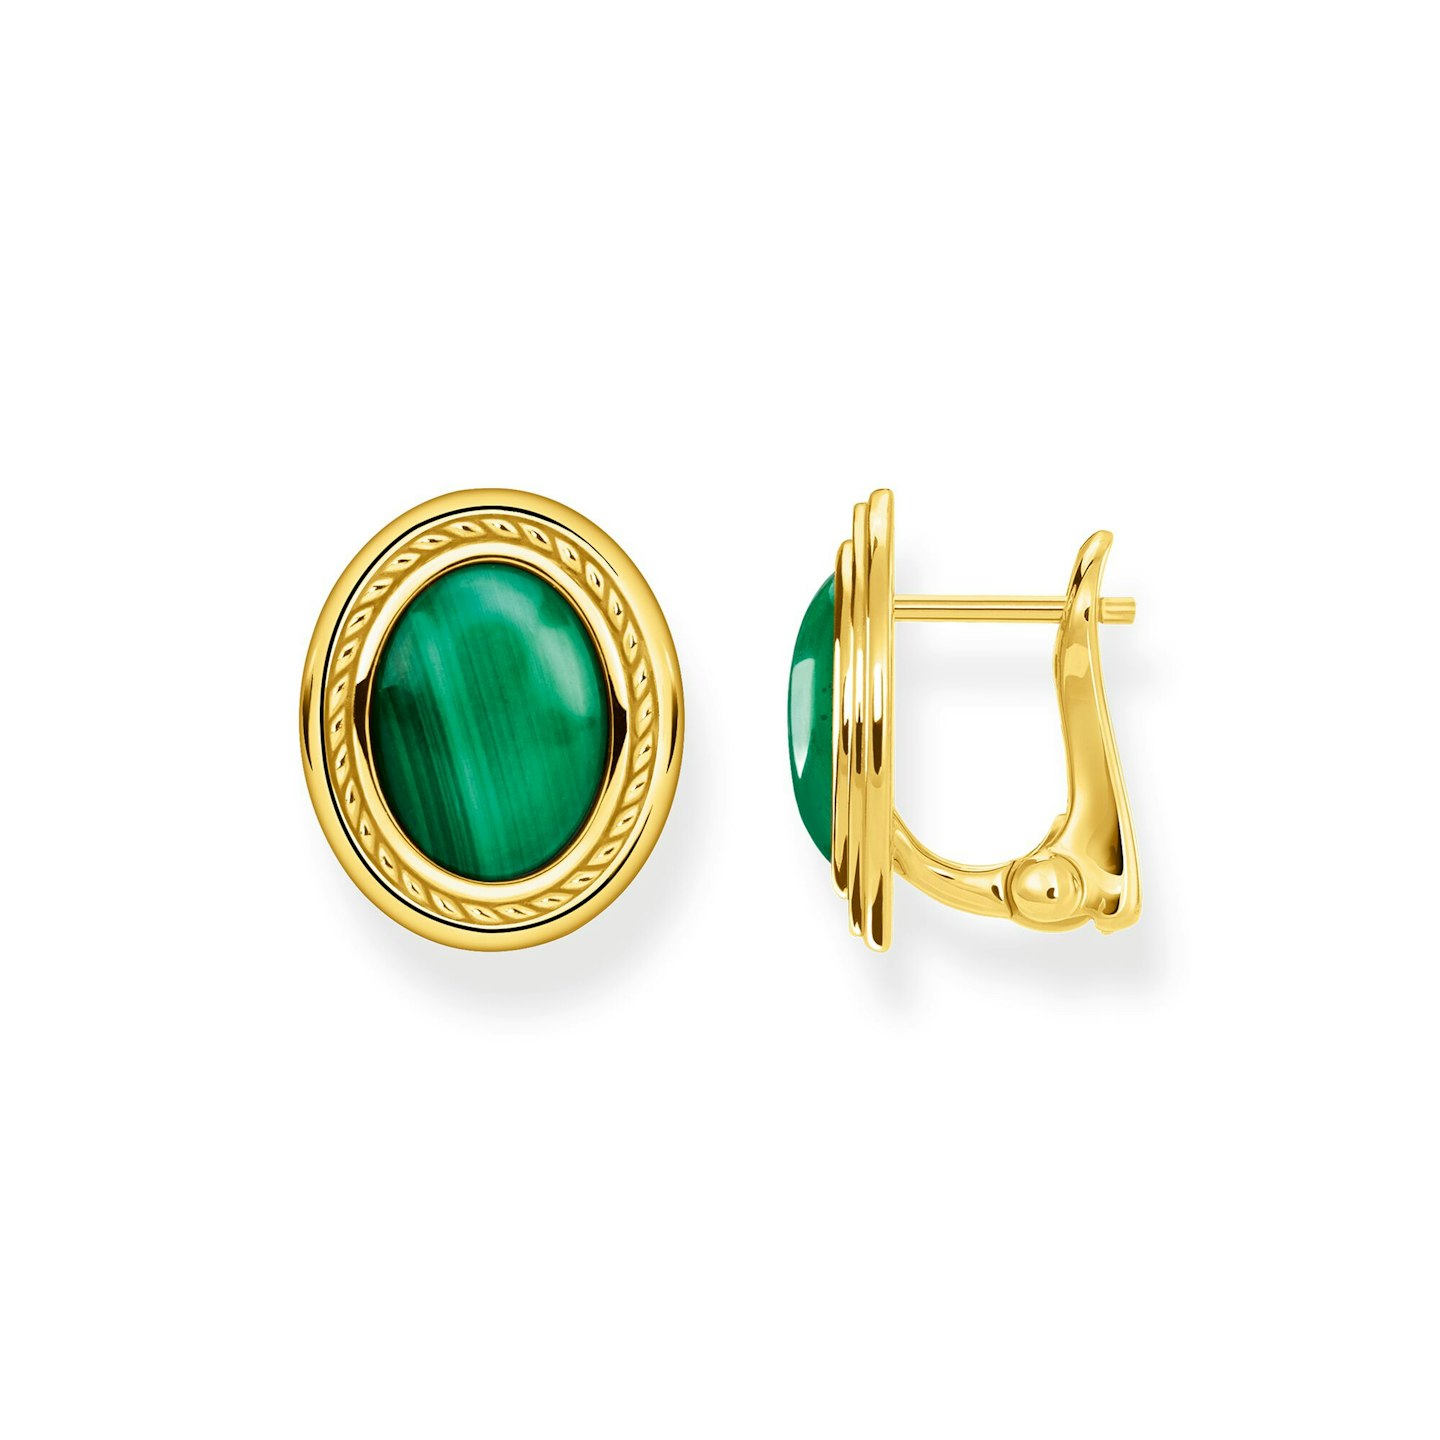 Ear Studs In Gold with Green Stone, £198